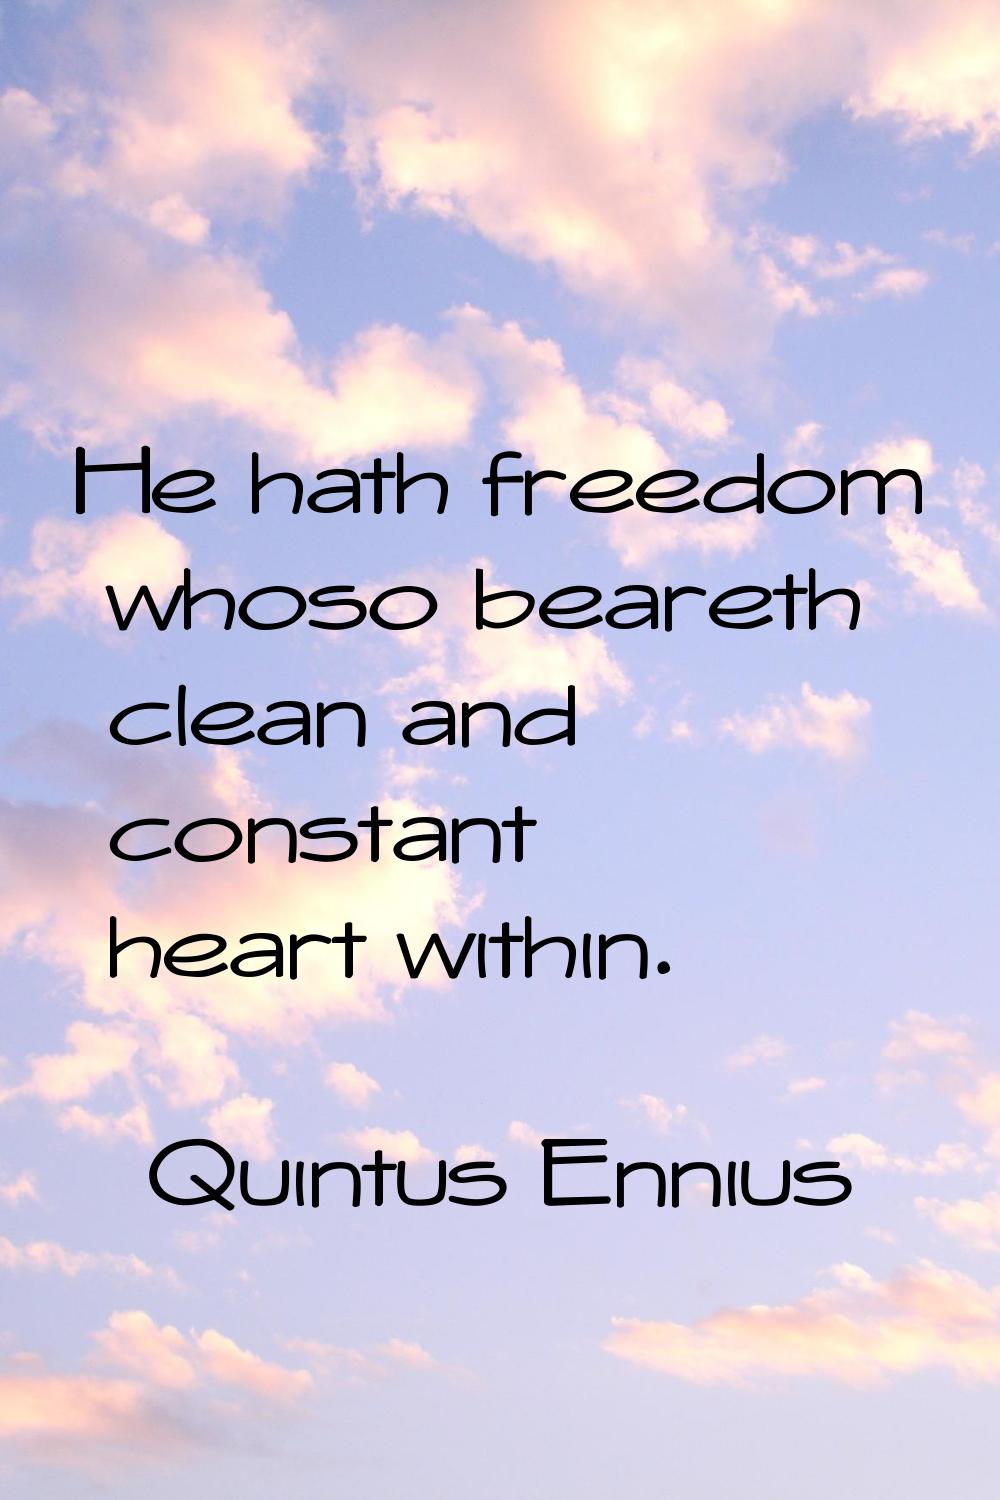 He hath freedom whoso beareth clean and constant heart within.